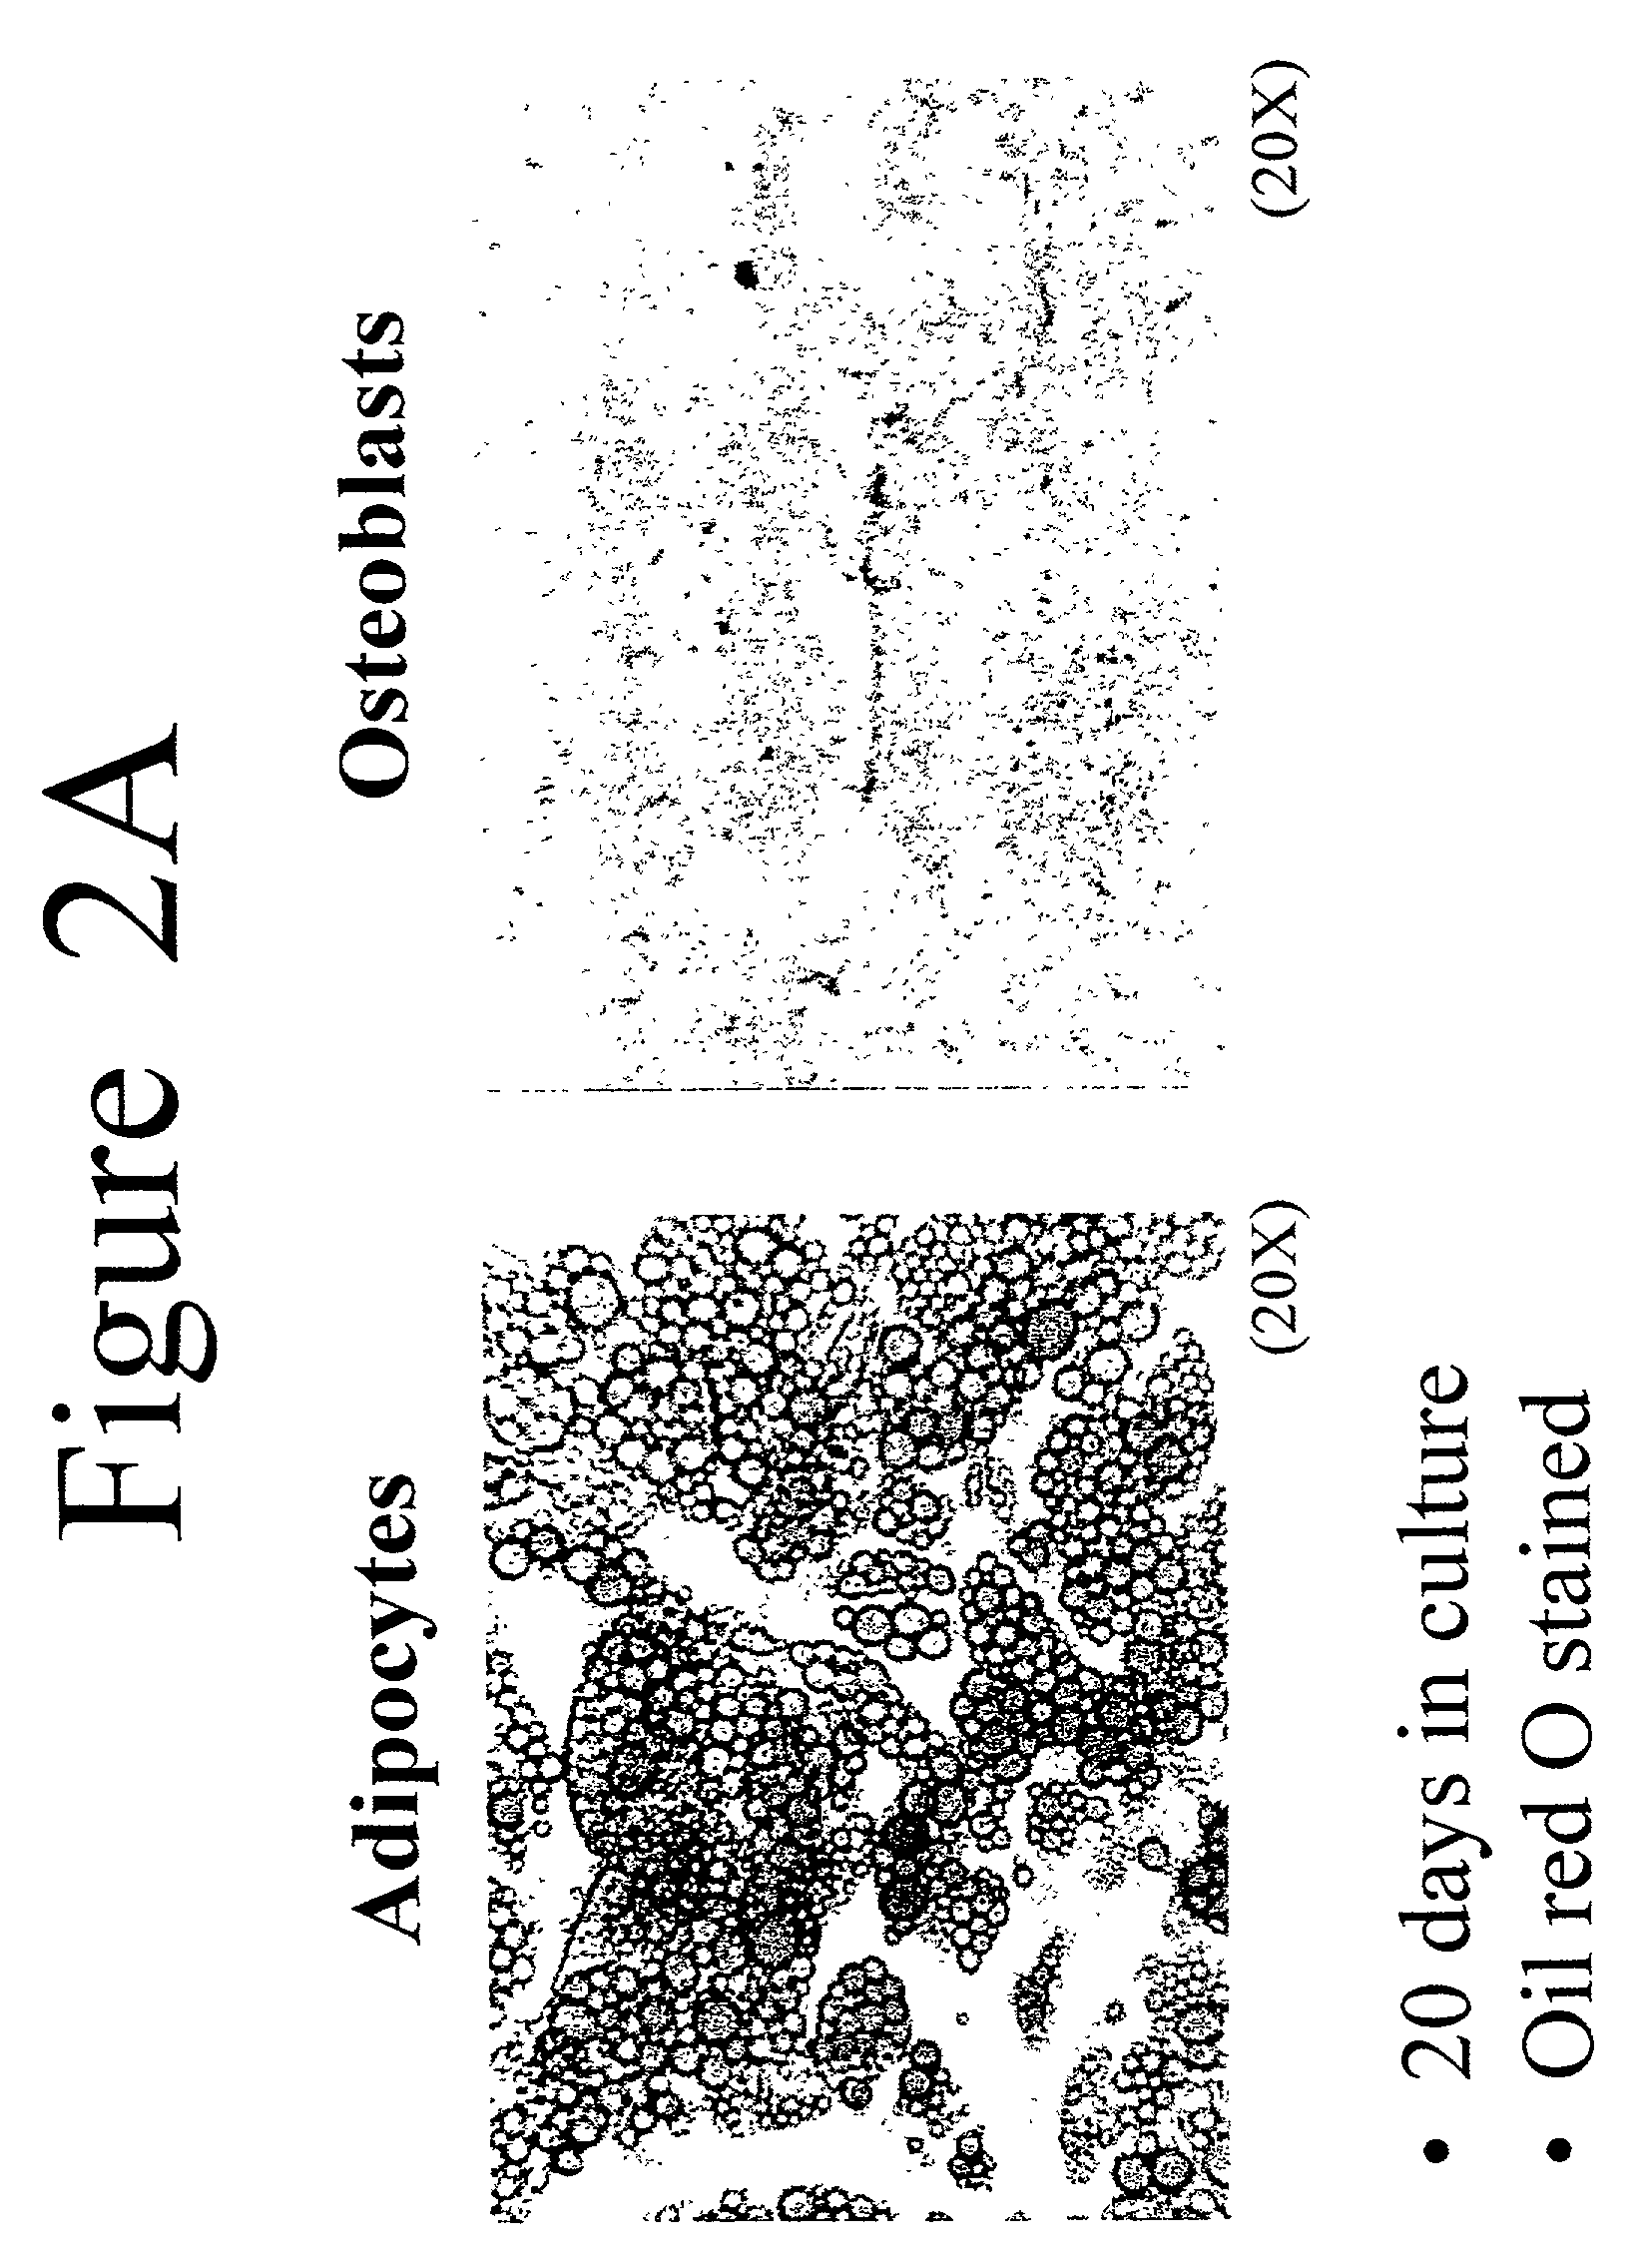 Differentiation of adipose stromal cells into osteoblasts and uses thereof